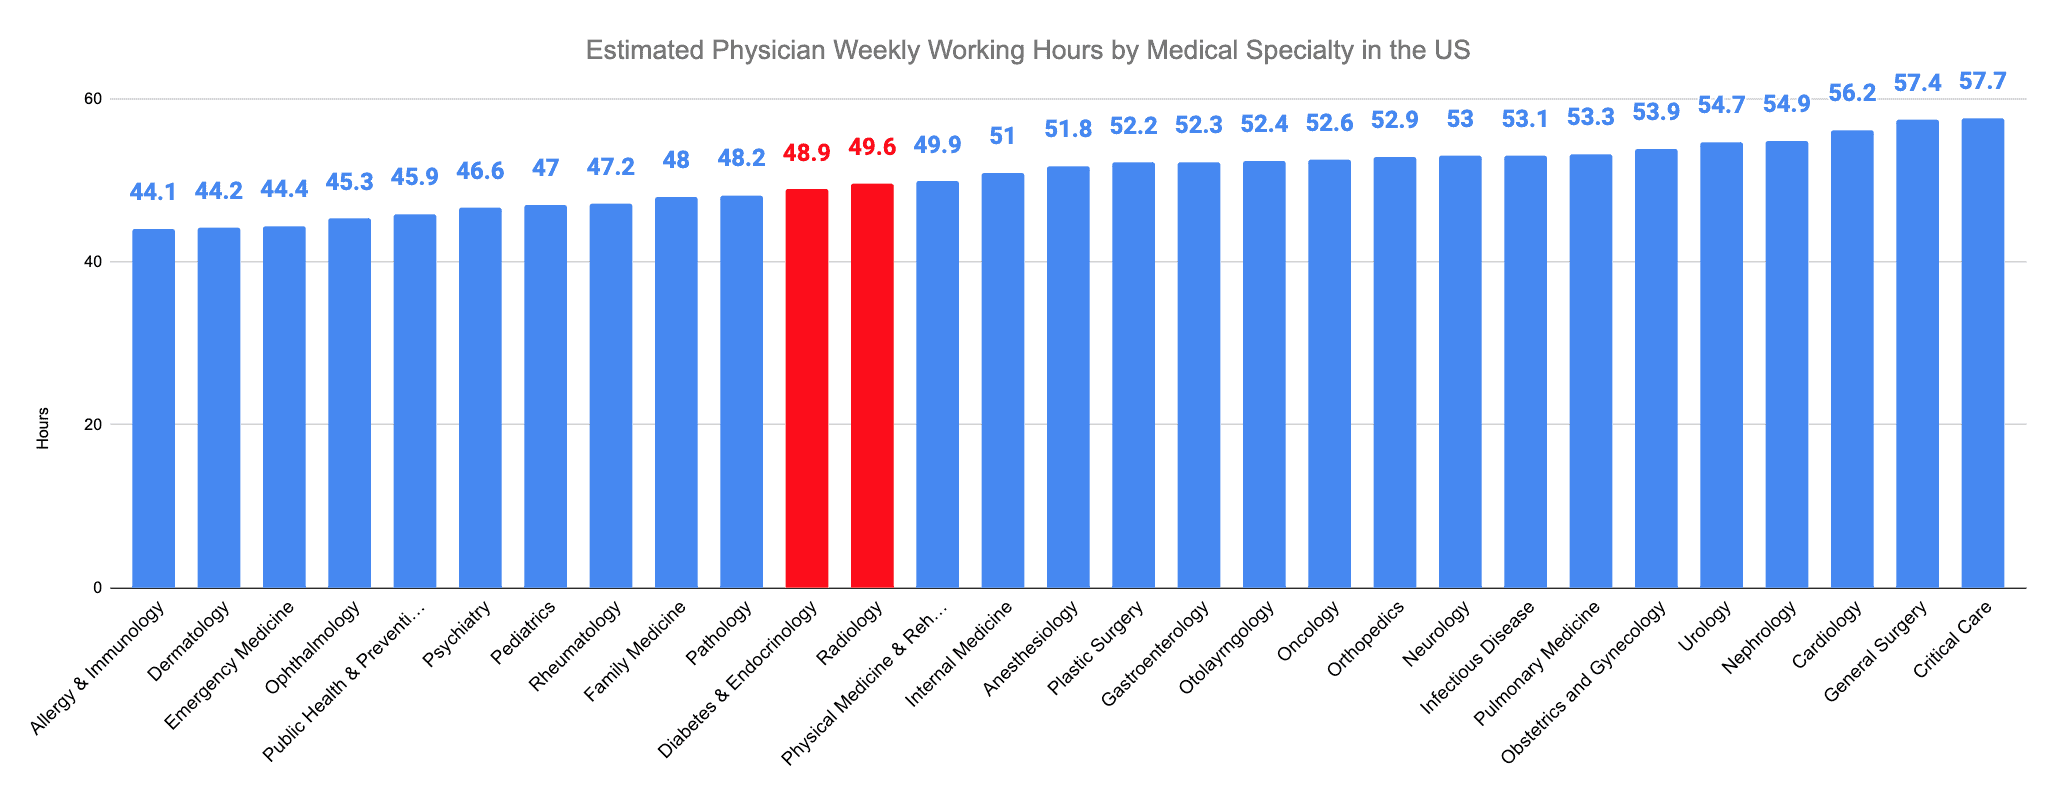 Radiology vs. Diabetes and Endocrinology Estimated Physician Weekly Working Hours by Medical Specialty in the US